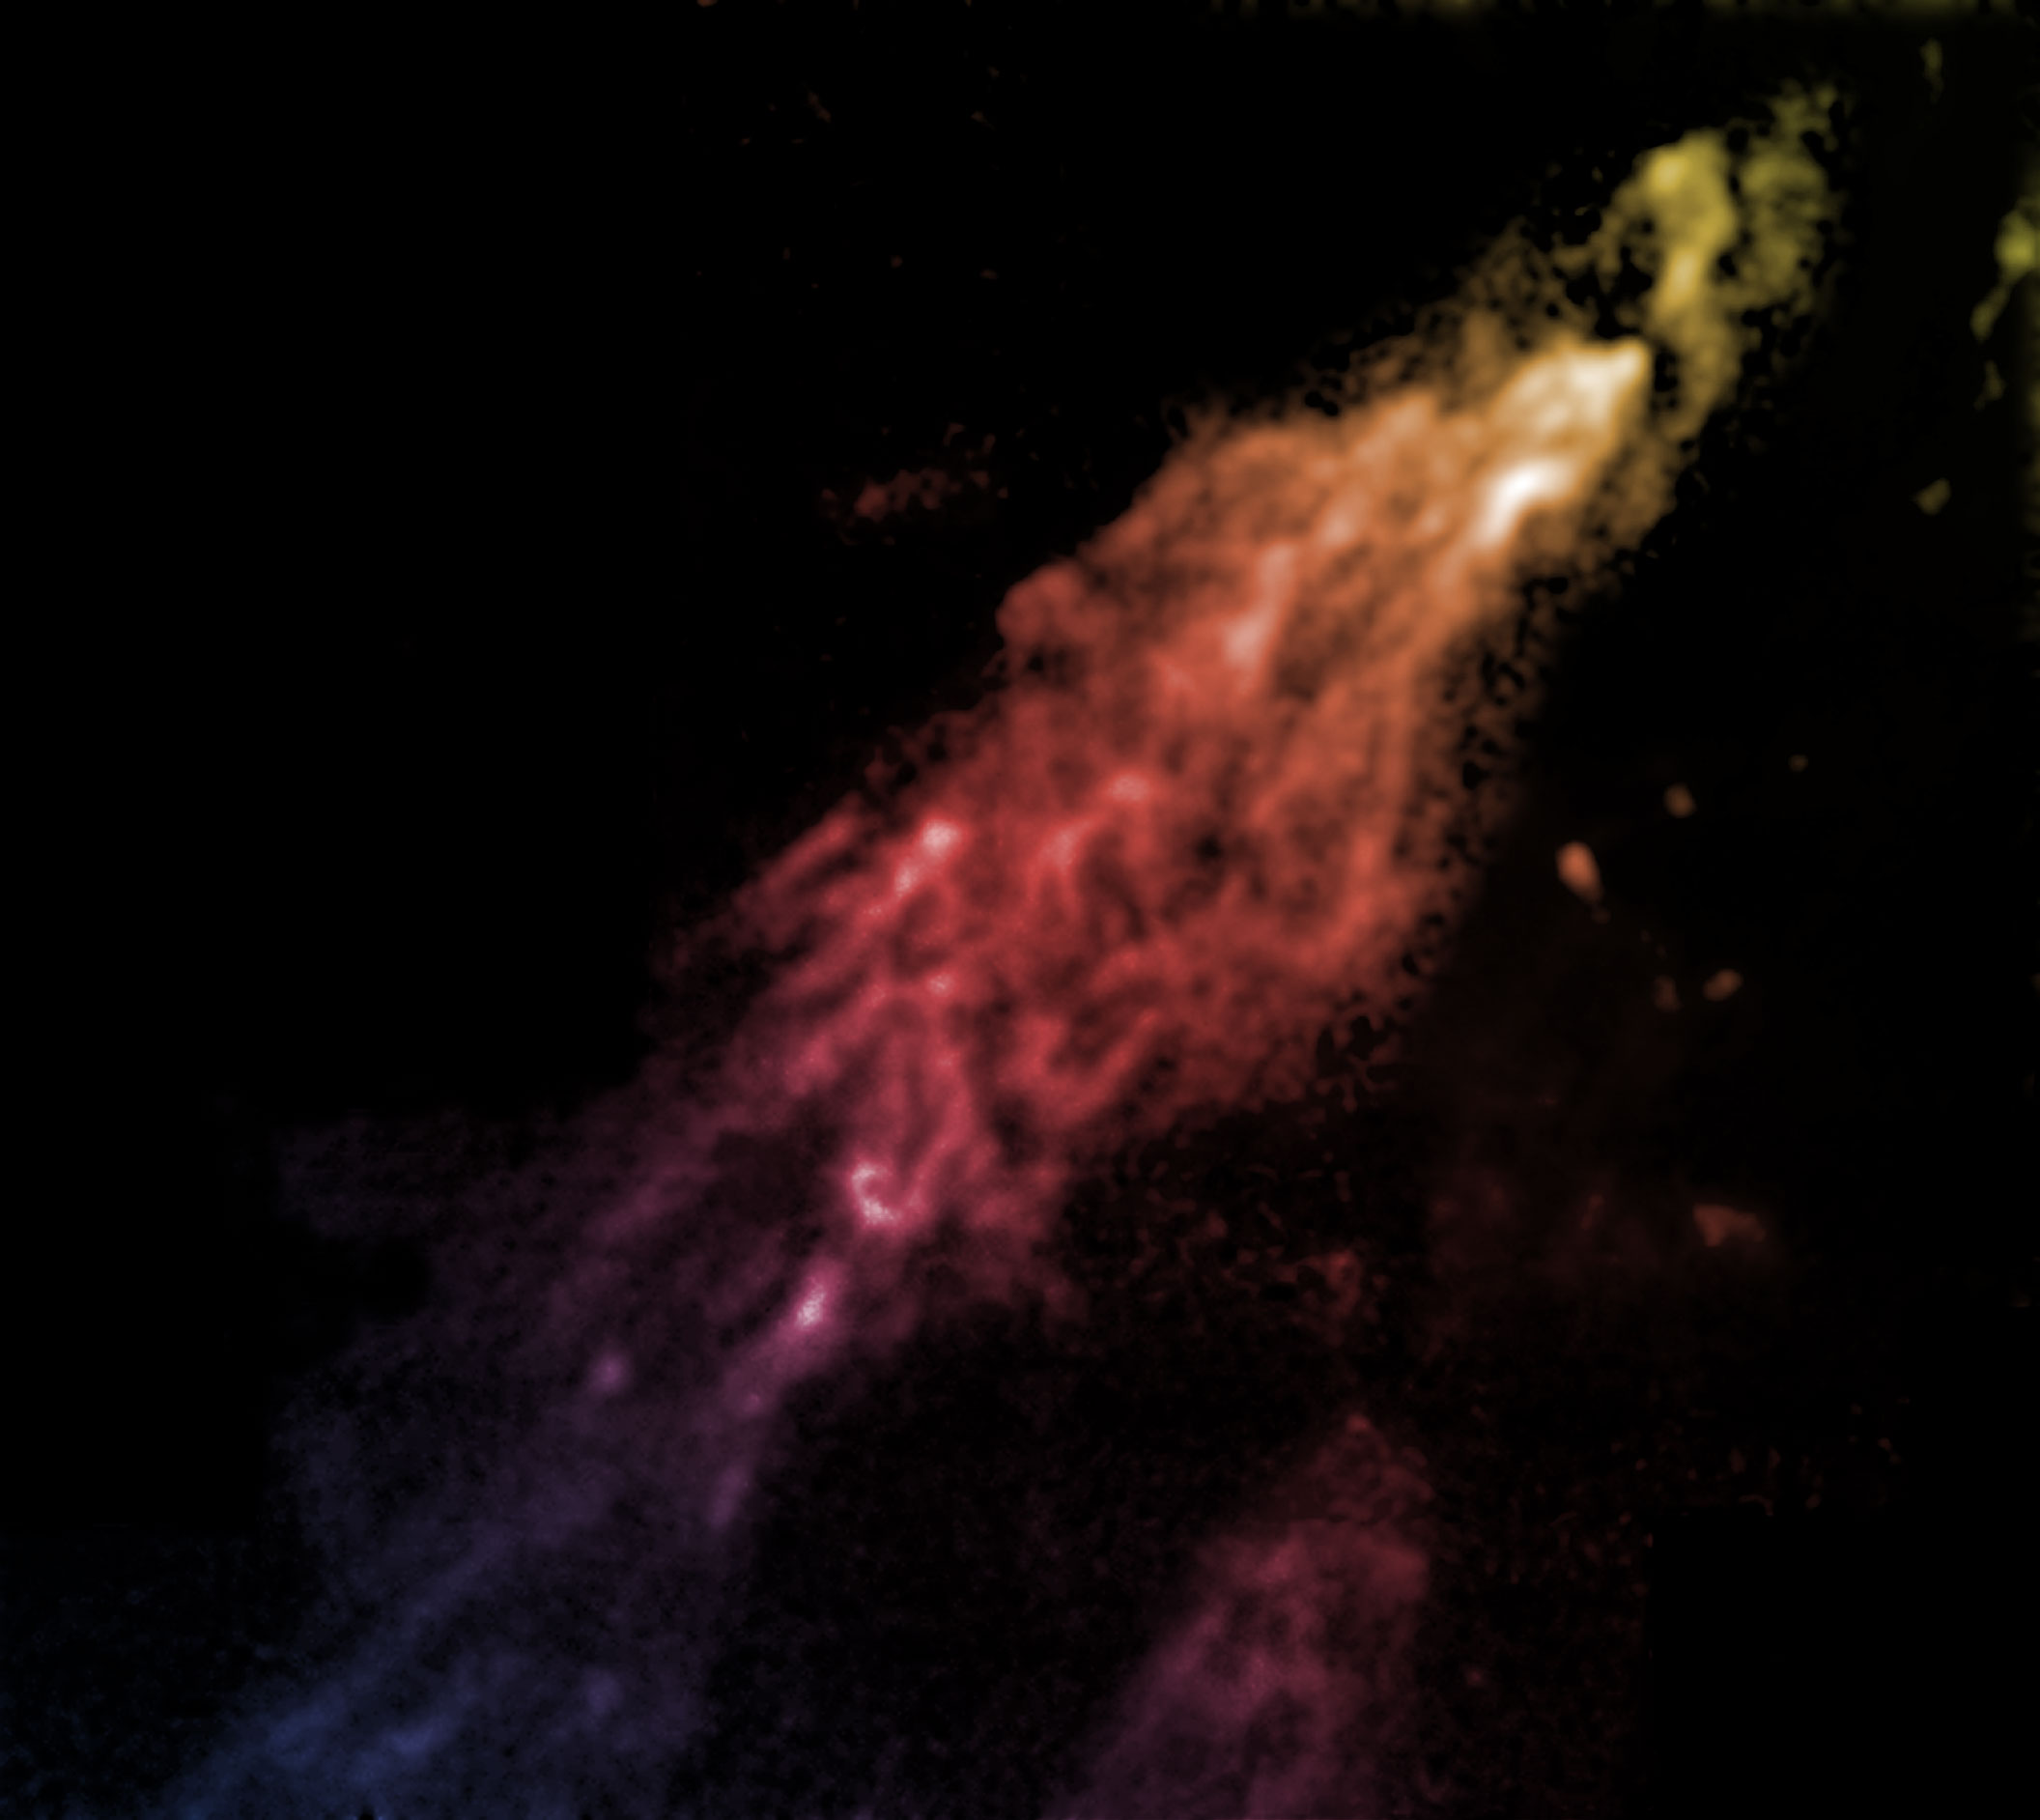 A comet-shaped cloud of gas, coloured from yellow at one end through to orange, pink then purple.